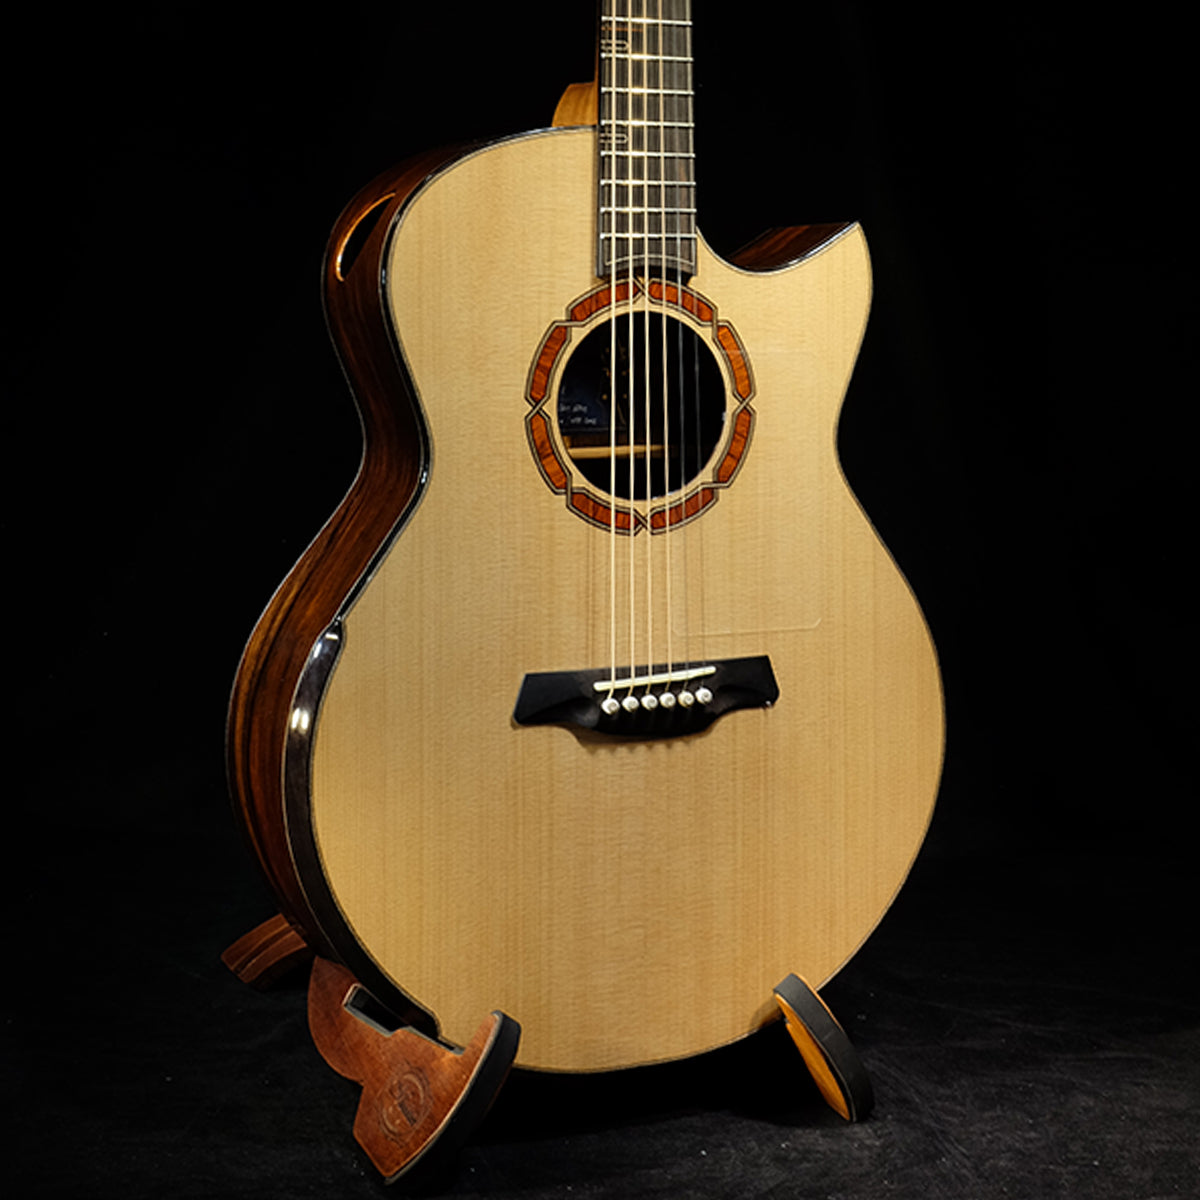 Blue Label SJ Sitka Spruce with Mexican Cocobolo| #11